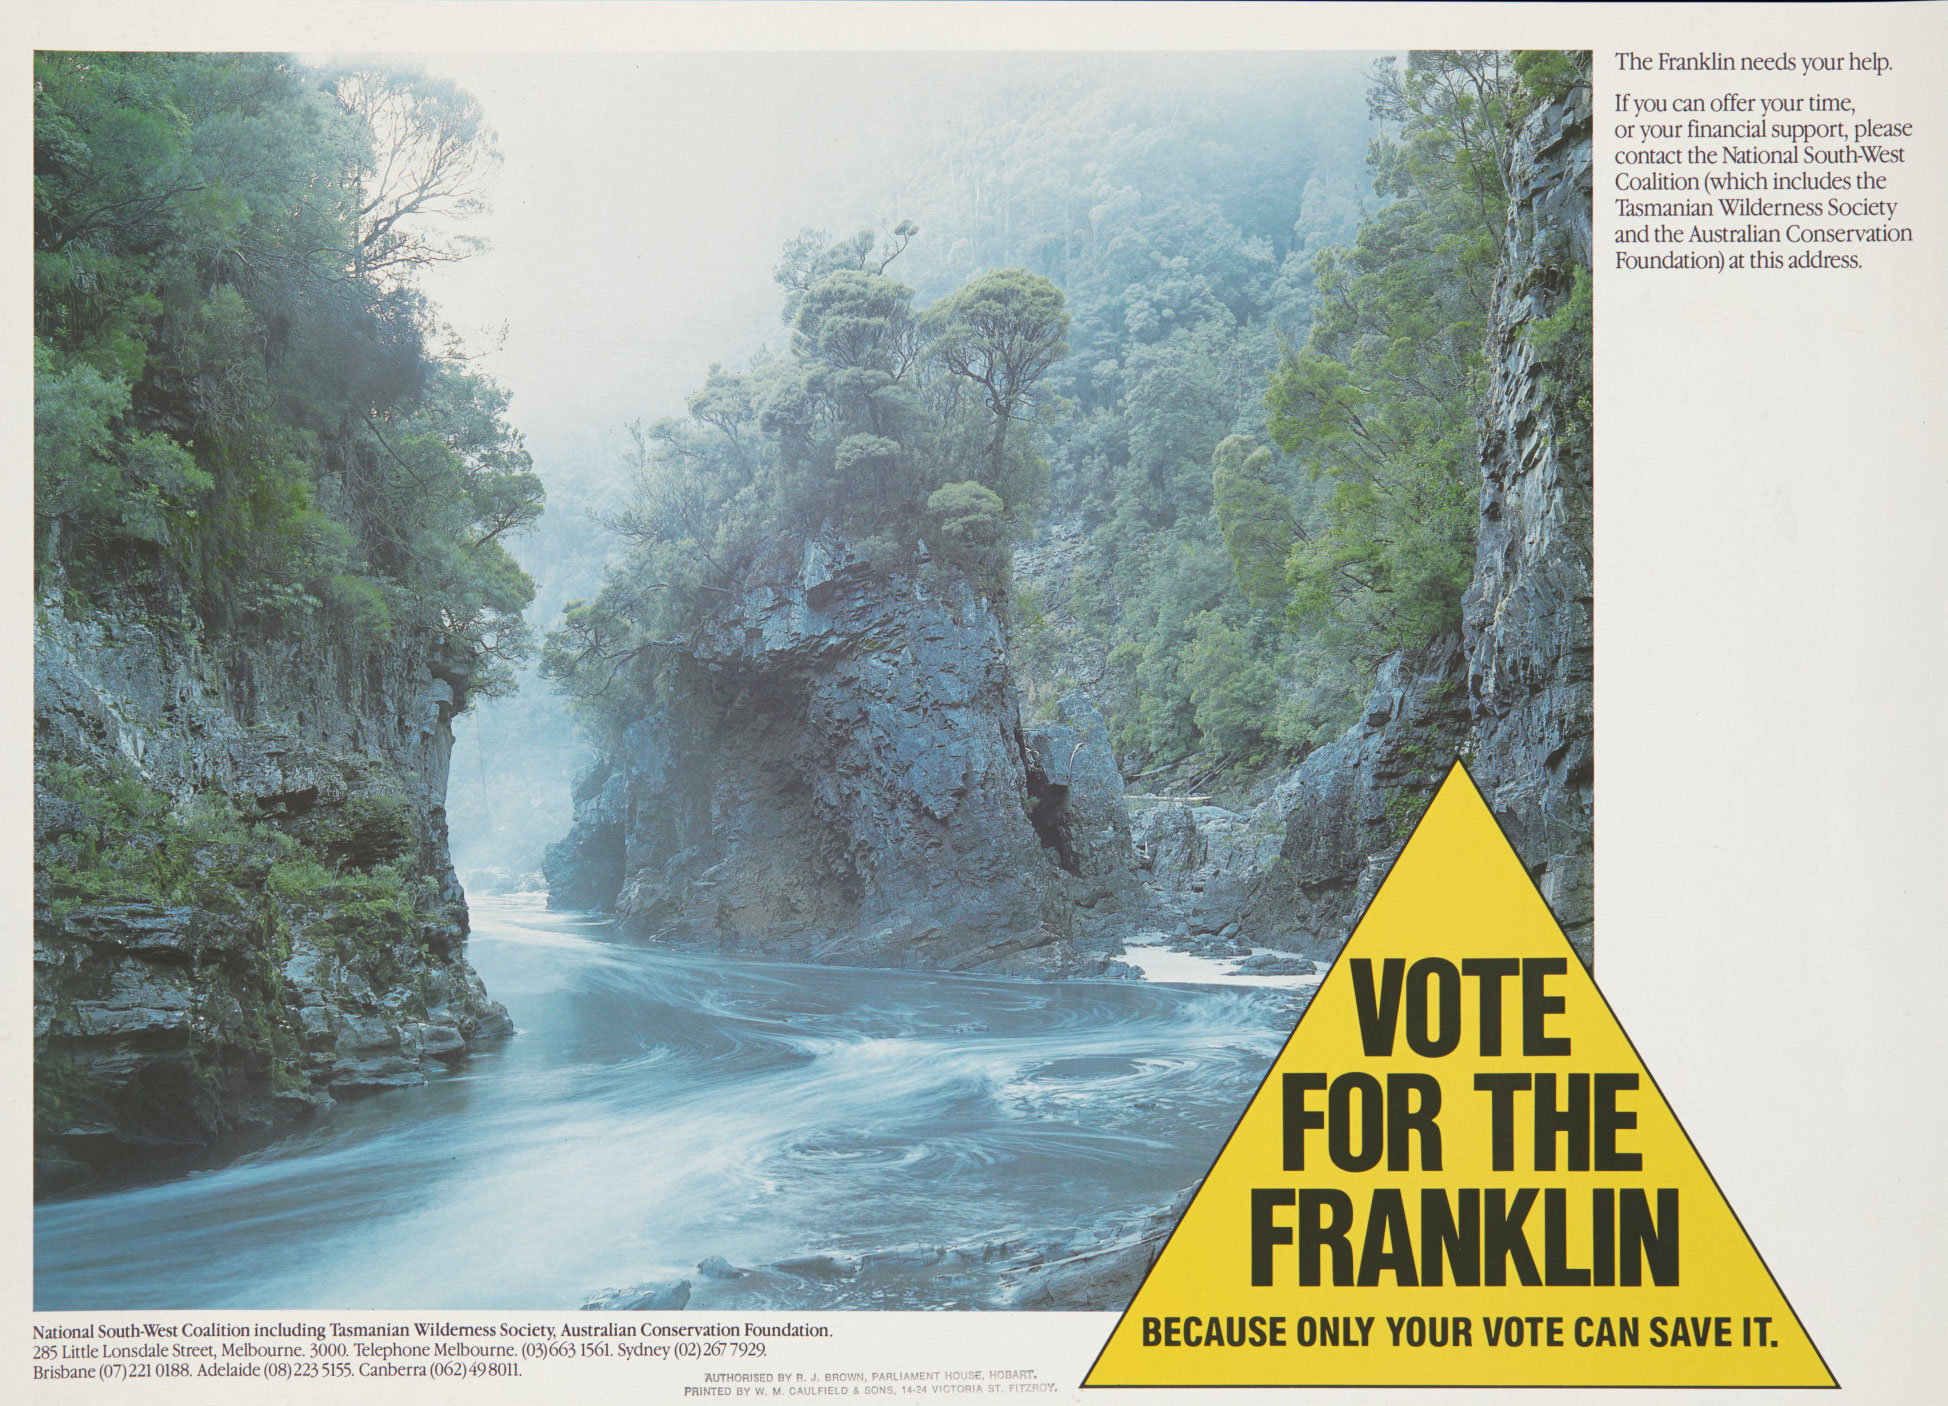 Poster reading ‘Vote for the Franklin because only your vote can save it’.